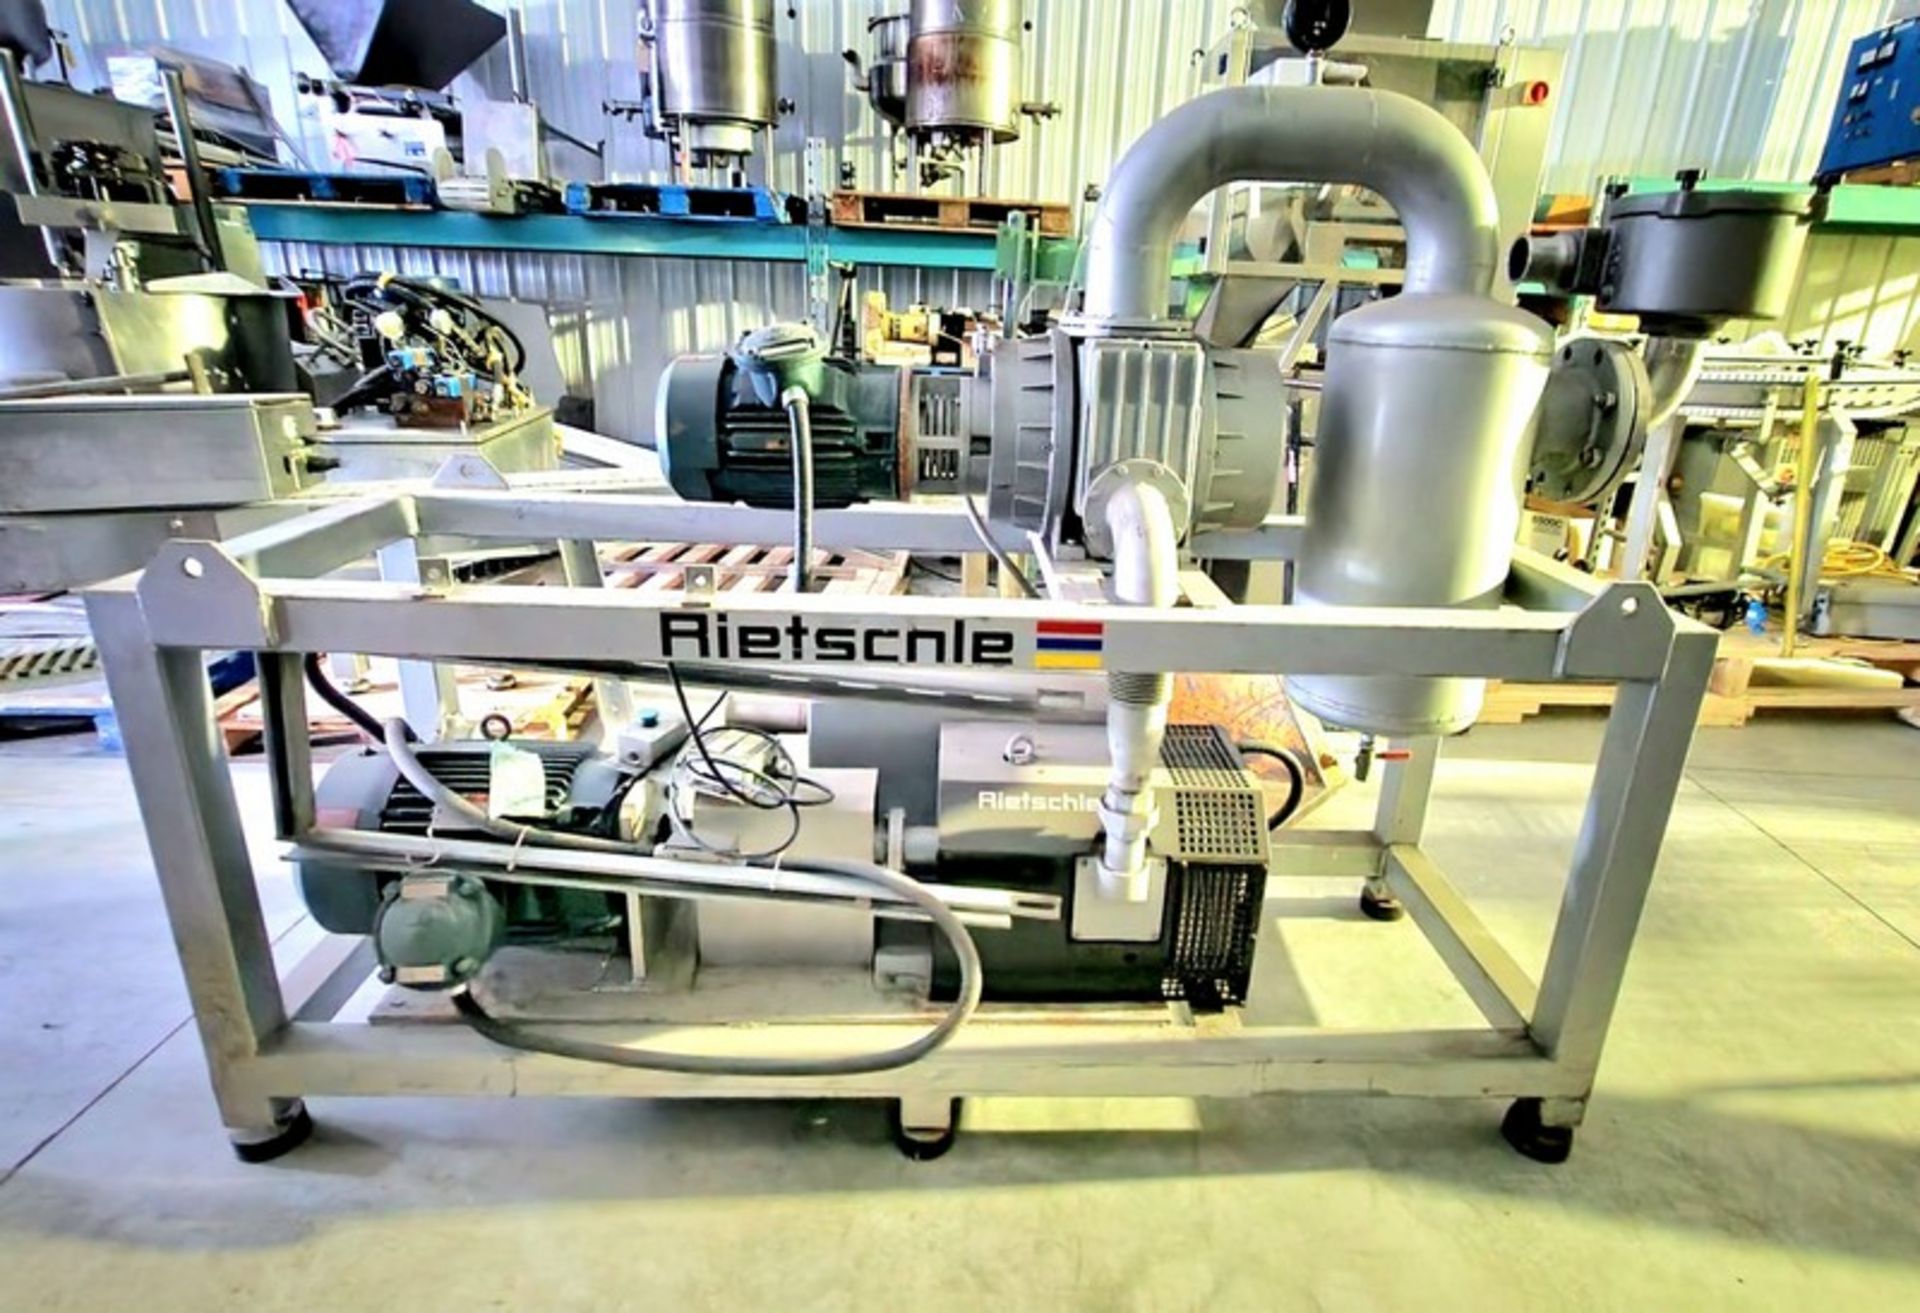 Rietschle Vacuum System modele VC300 01, 02567-0113 TYPE 1000 575volts / 5.20 / 3PH /60Hz 1 / SF 1, - Image 10 of 11